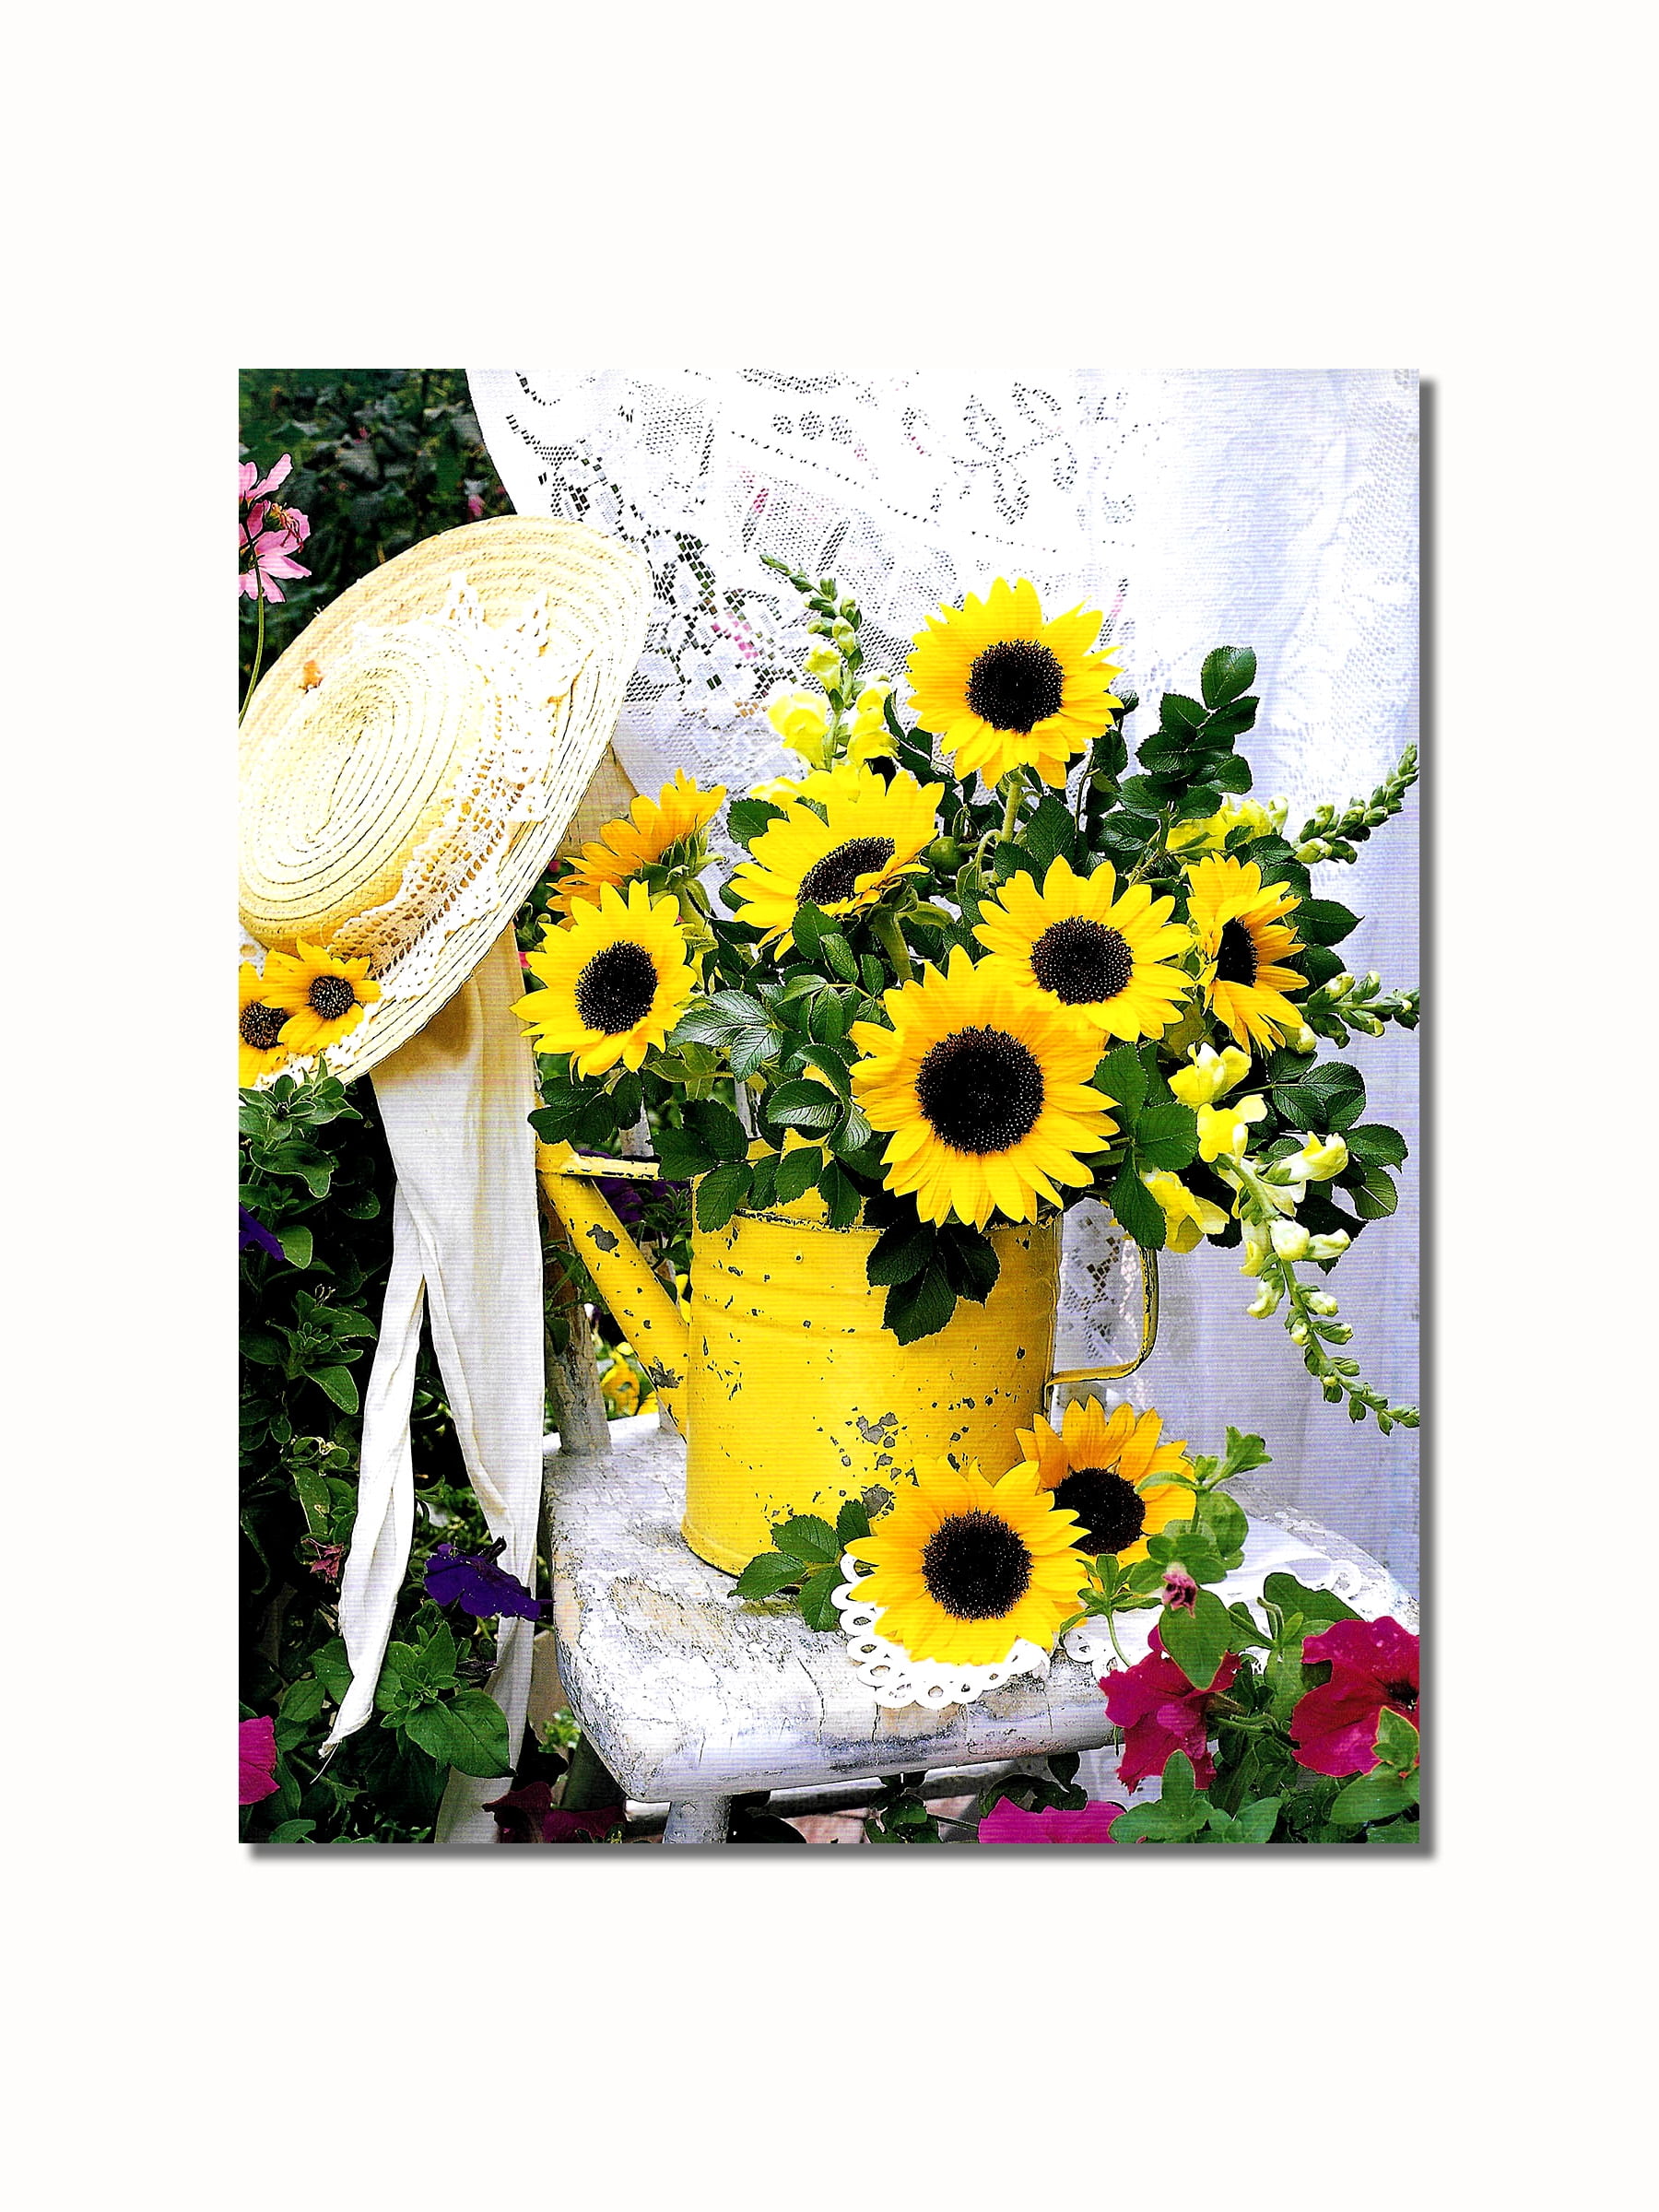 Sunflowers in Watering Can #2 Rustic Shed Wheel Wall Picture 8x10 Art Print 